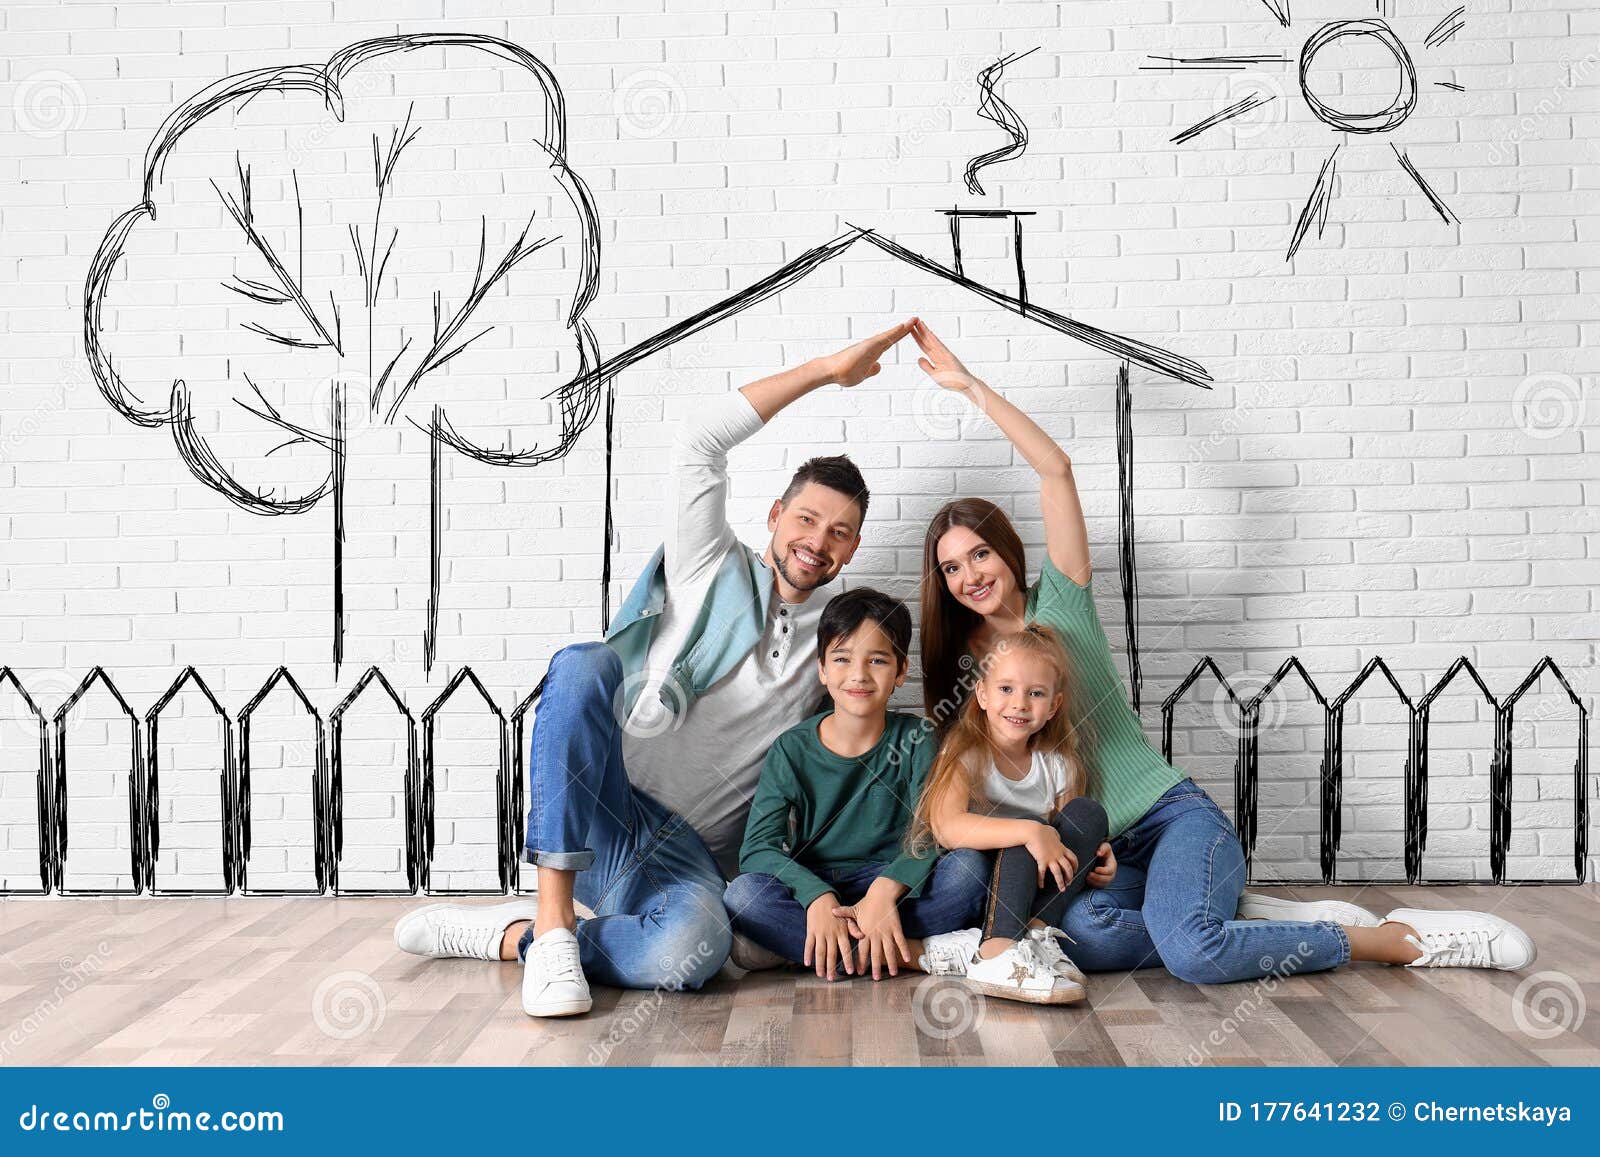 happy family with kids dreaming about house. s on brick wall